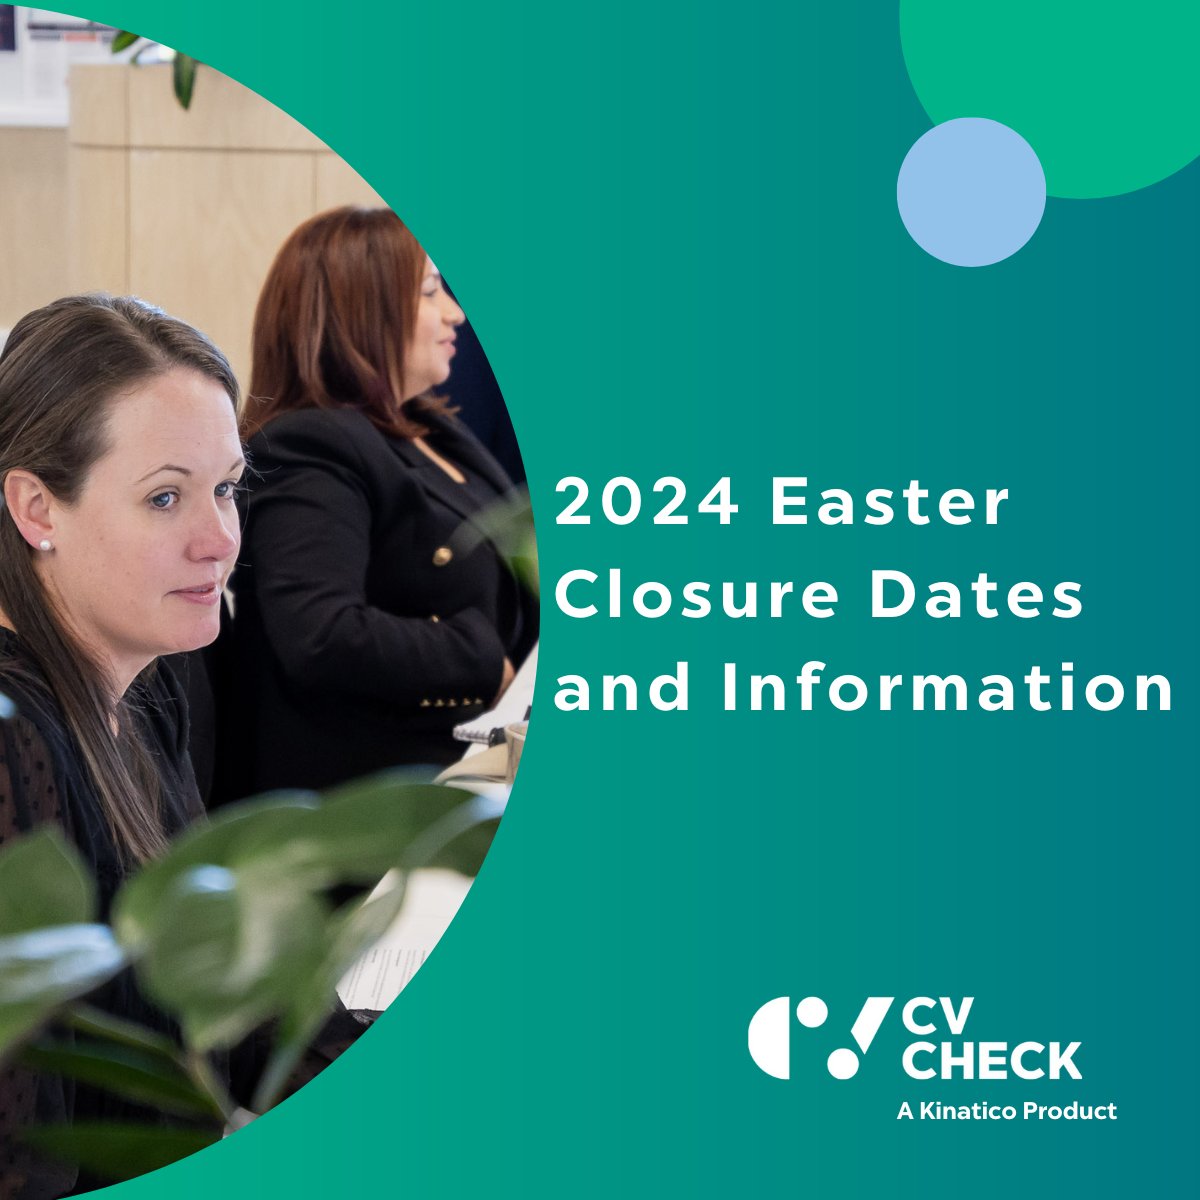 Kinatico offices across Australia and New Zealand will be closed from the 29th of March to April 1st.
 
During this period, there may be delays with our National Police Checking Service due to ACIC schedules.
 
For online support, visit CVCheck Help: cvcheck.com/contactus/